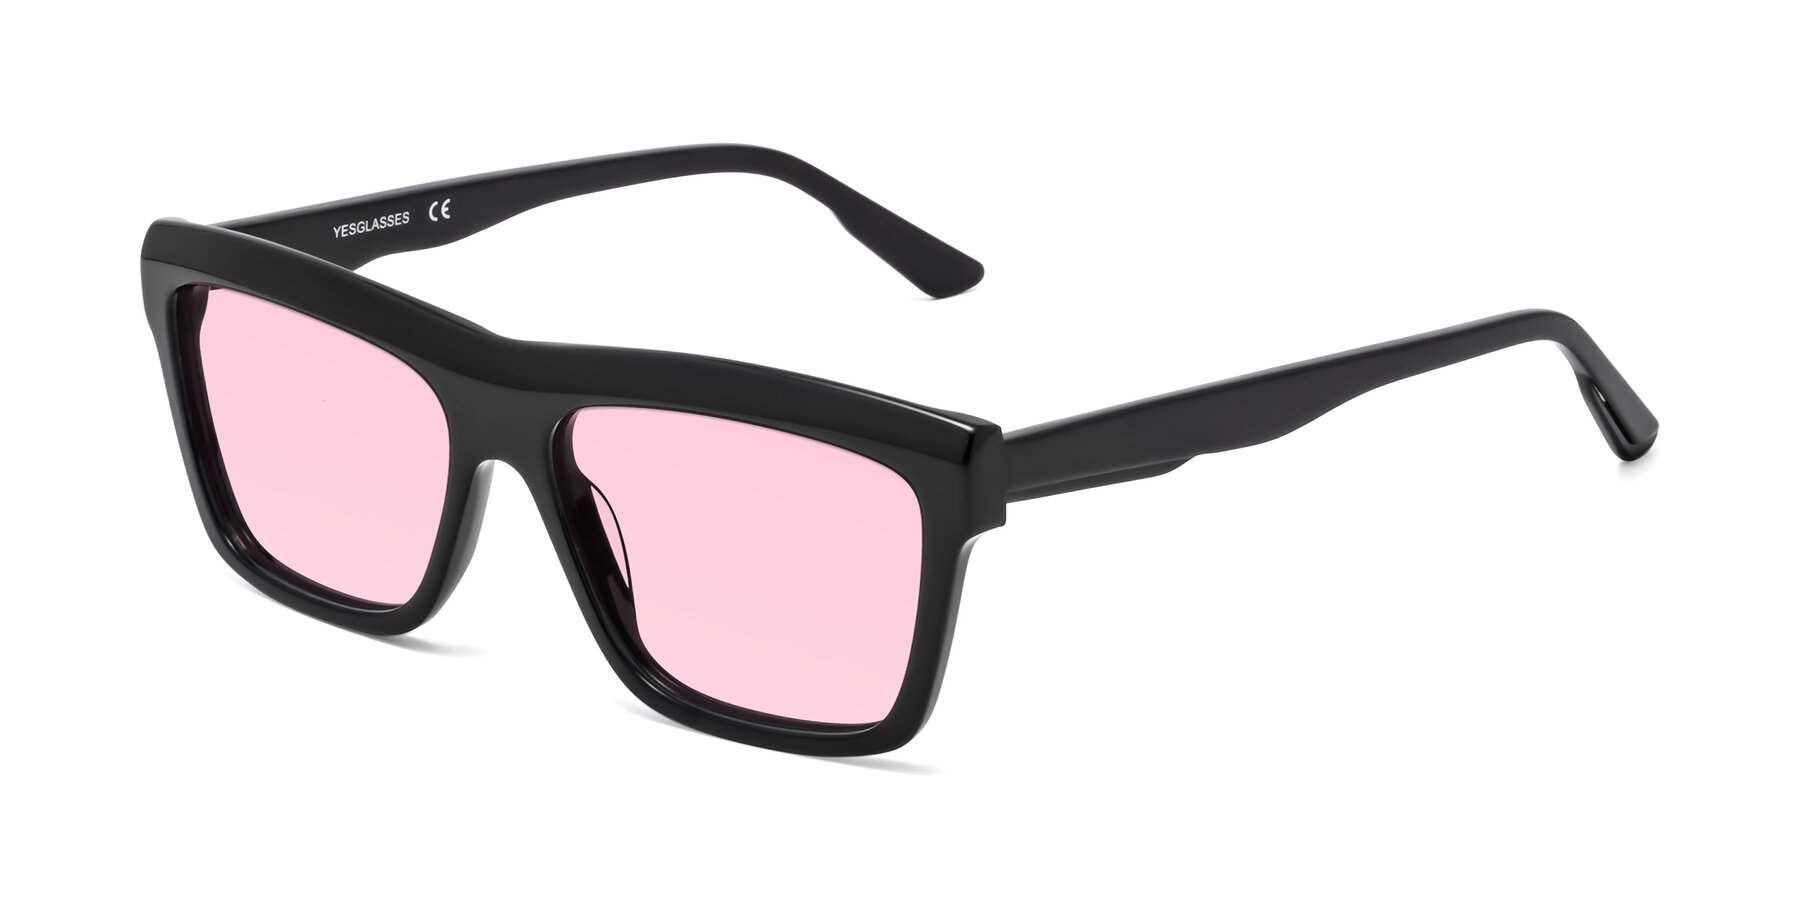 Angle of 1481 in Black with Light Pink Tinted Lenses